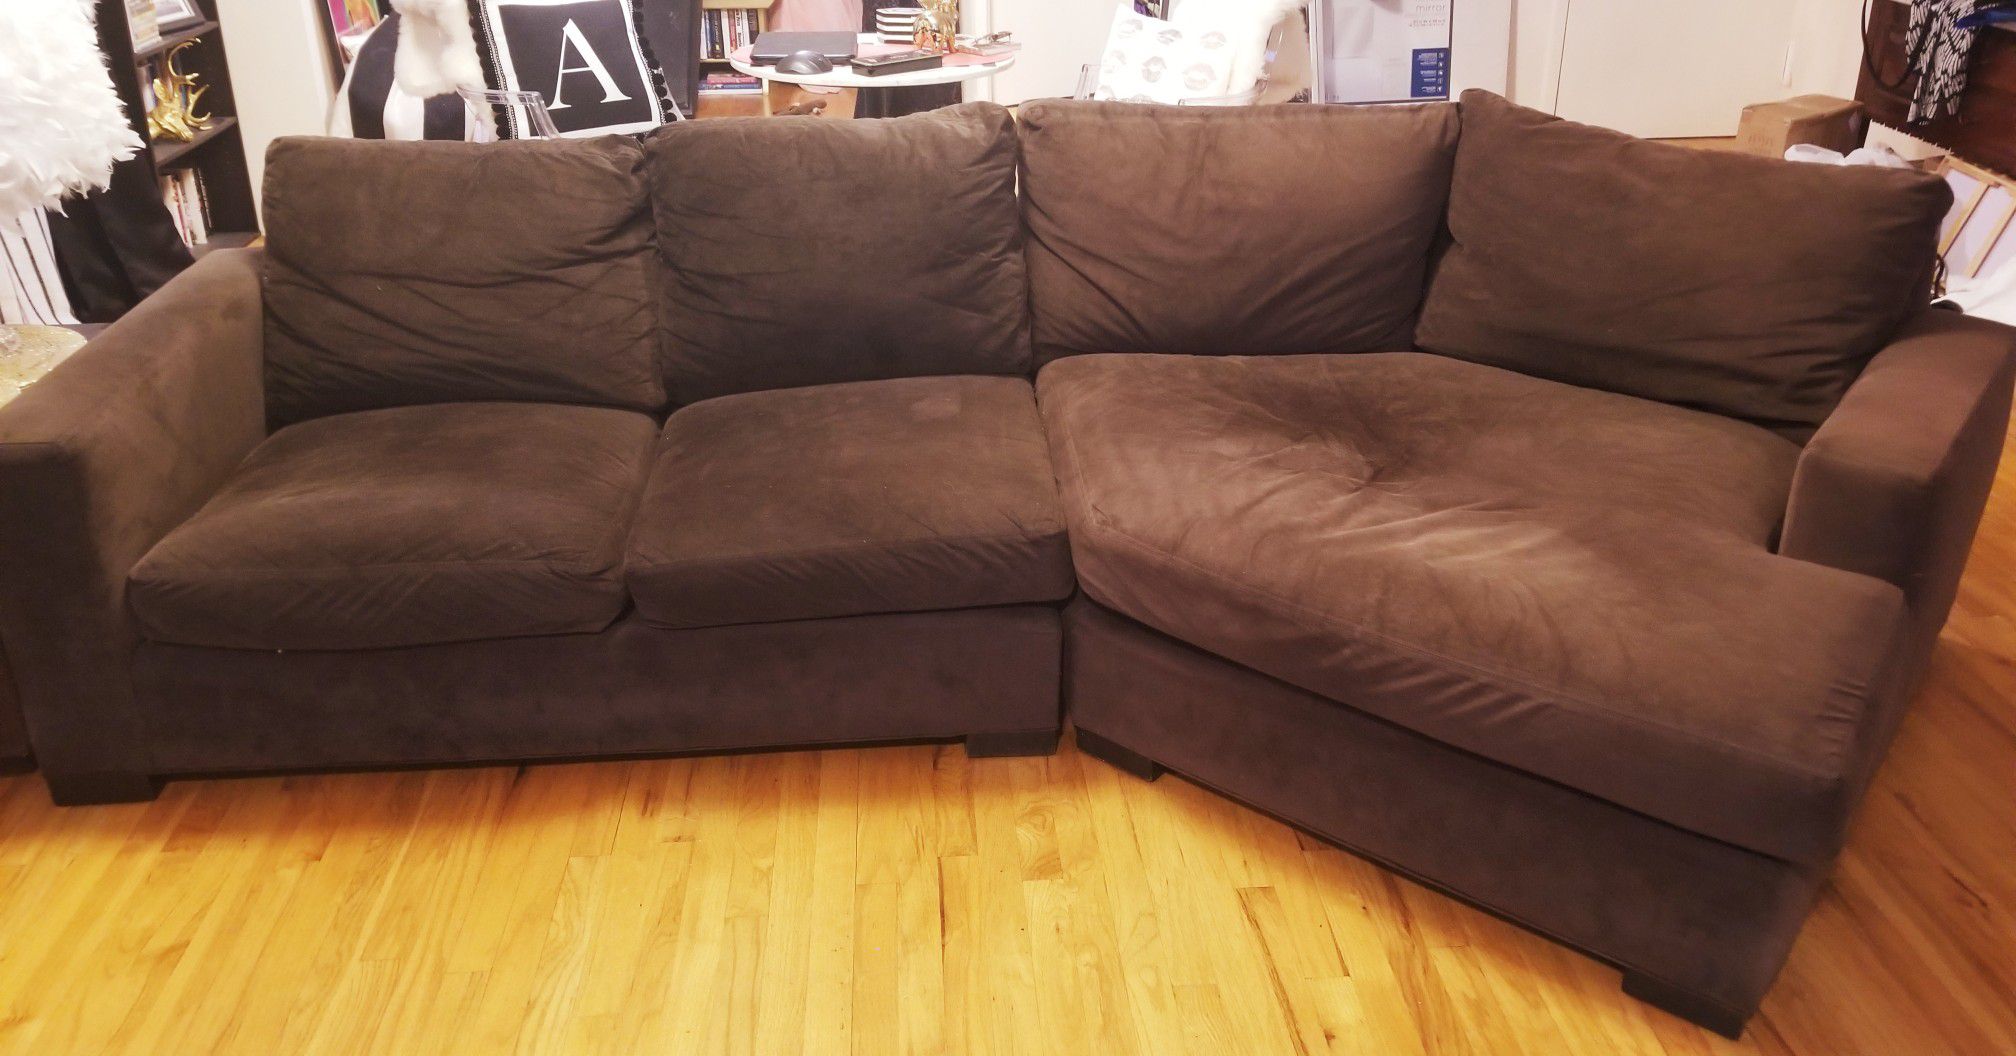 PRICED TO MOVE! Room & Board Metro Sofa with Right-Arm Angled Chaise